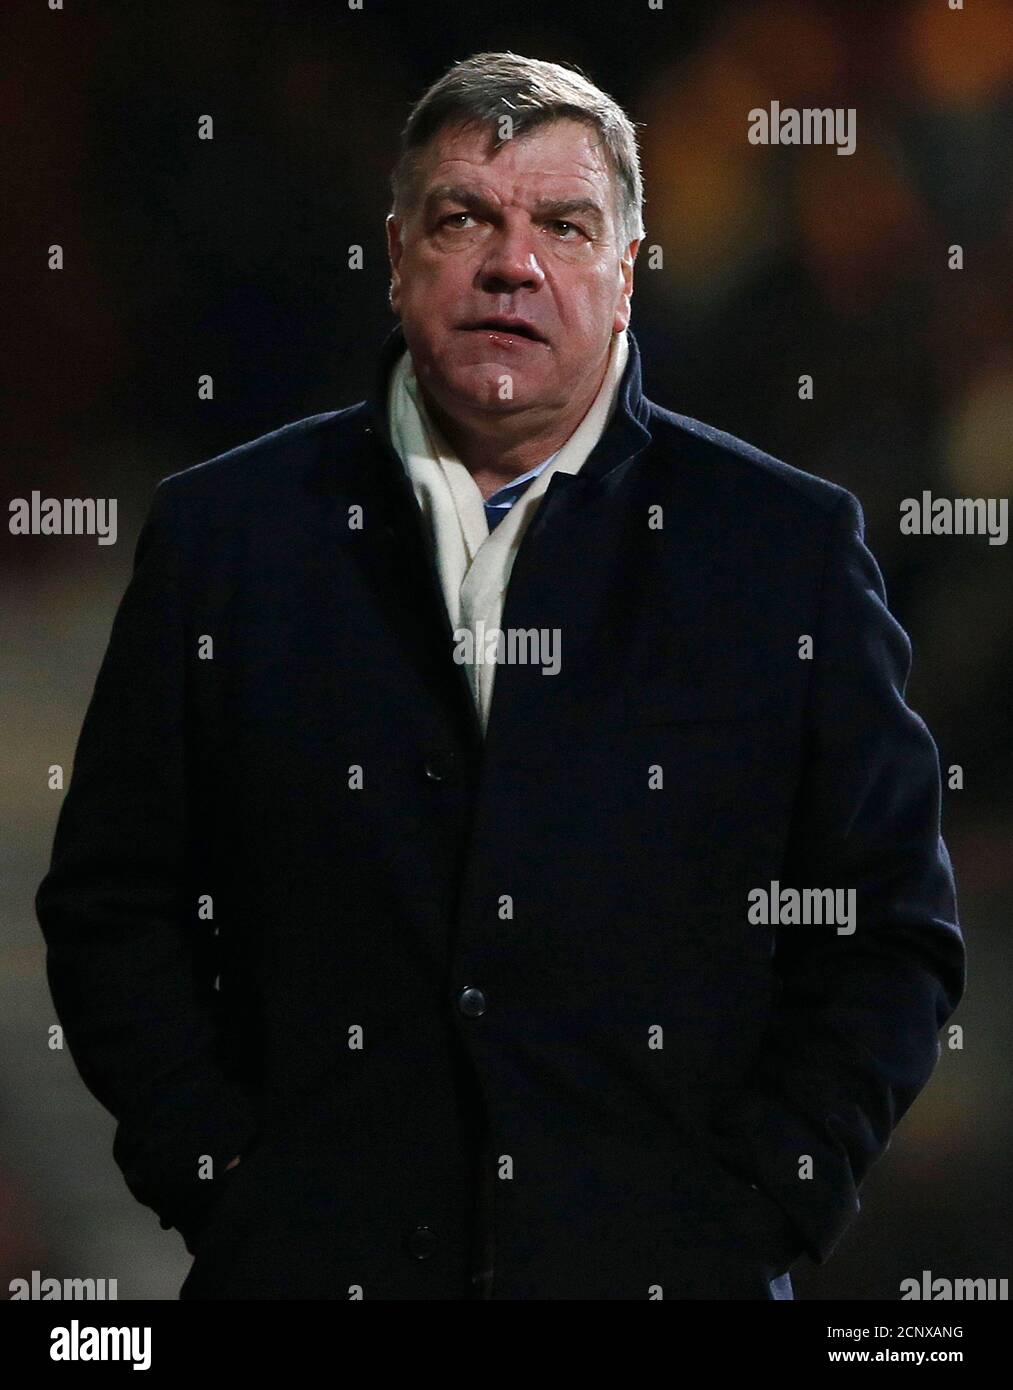 West Ham United's manager Sam Allardyce reacts during their English League Cup semi-final second leg soccer match against Manchester City at Boleyn Ground in London January 21, 2014. REUTERS/Stefan Wermuth (BRITAIN - Tags: SPORT SOCCER) Stock Photo